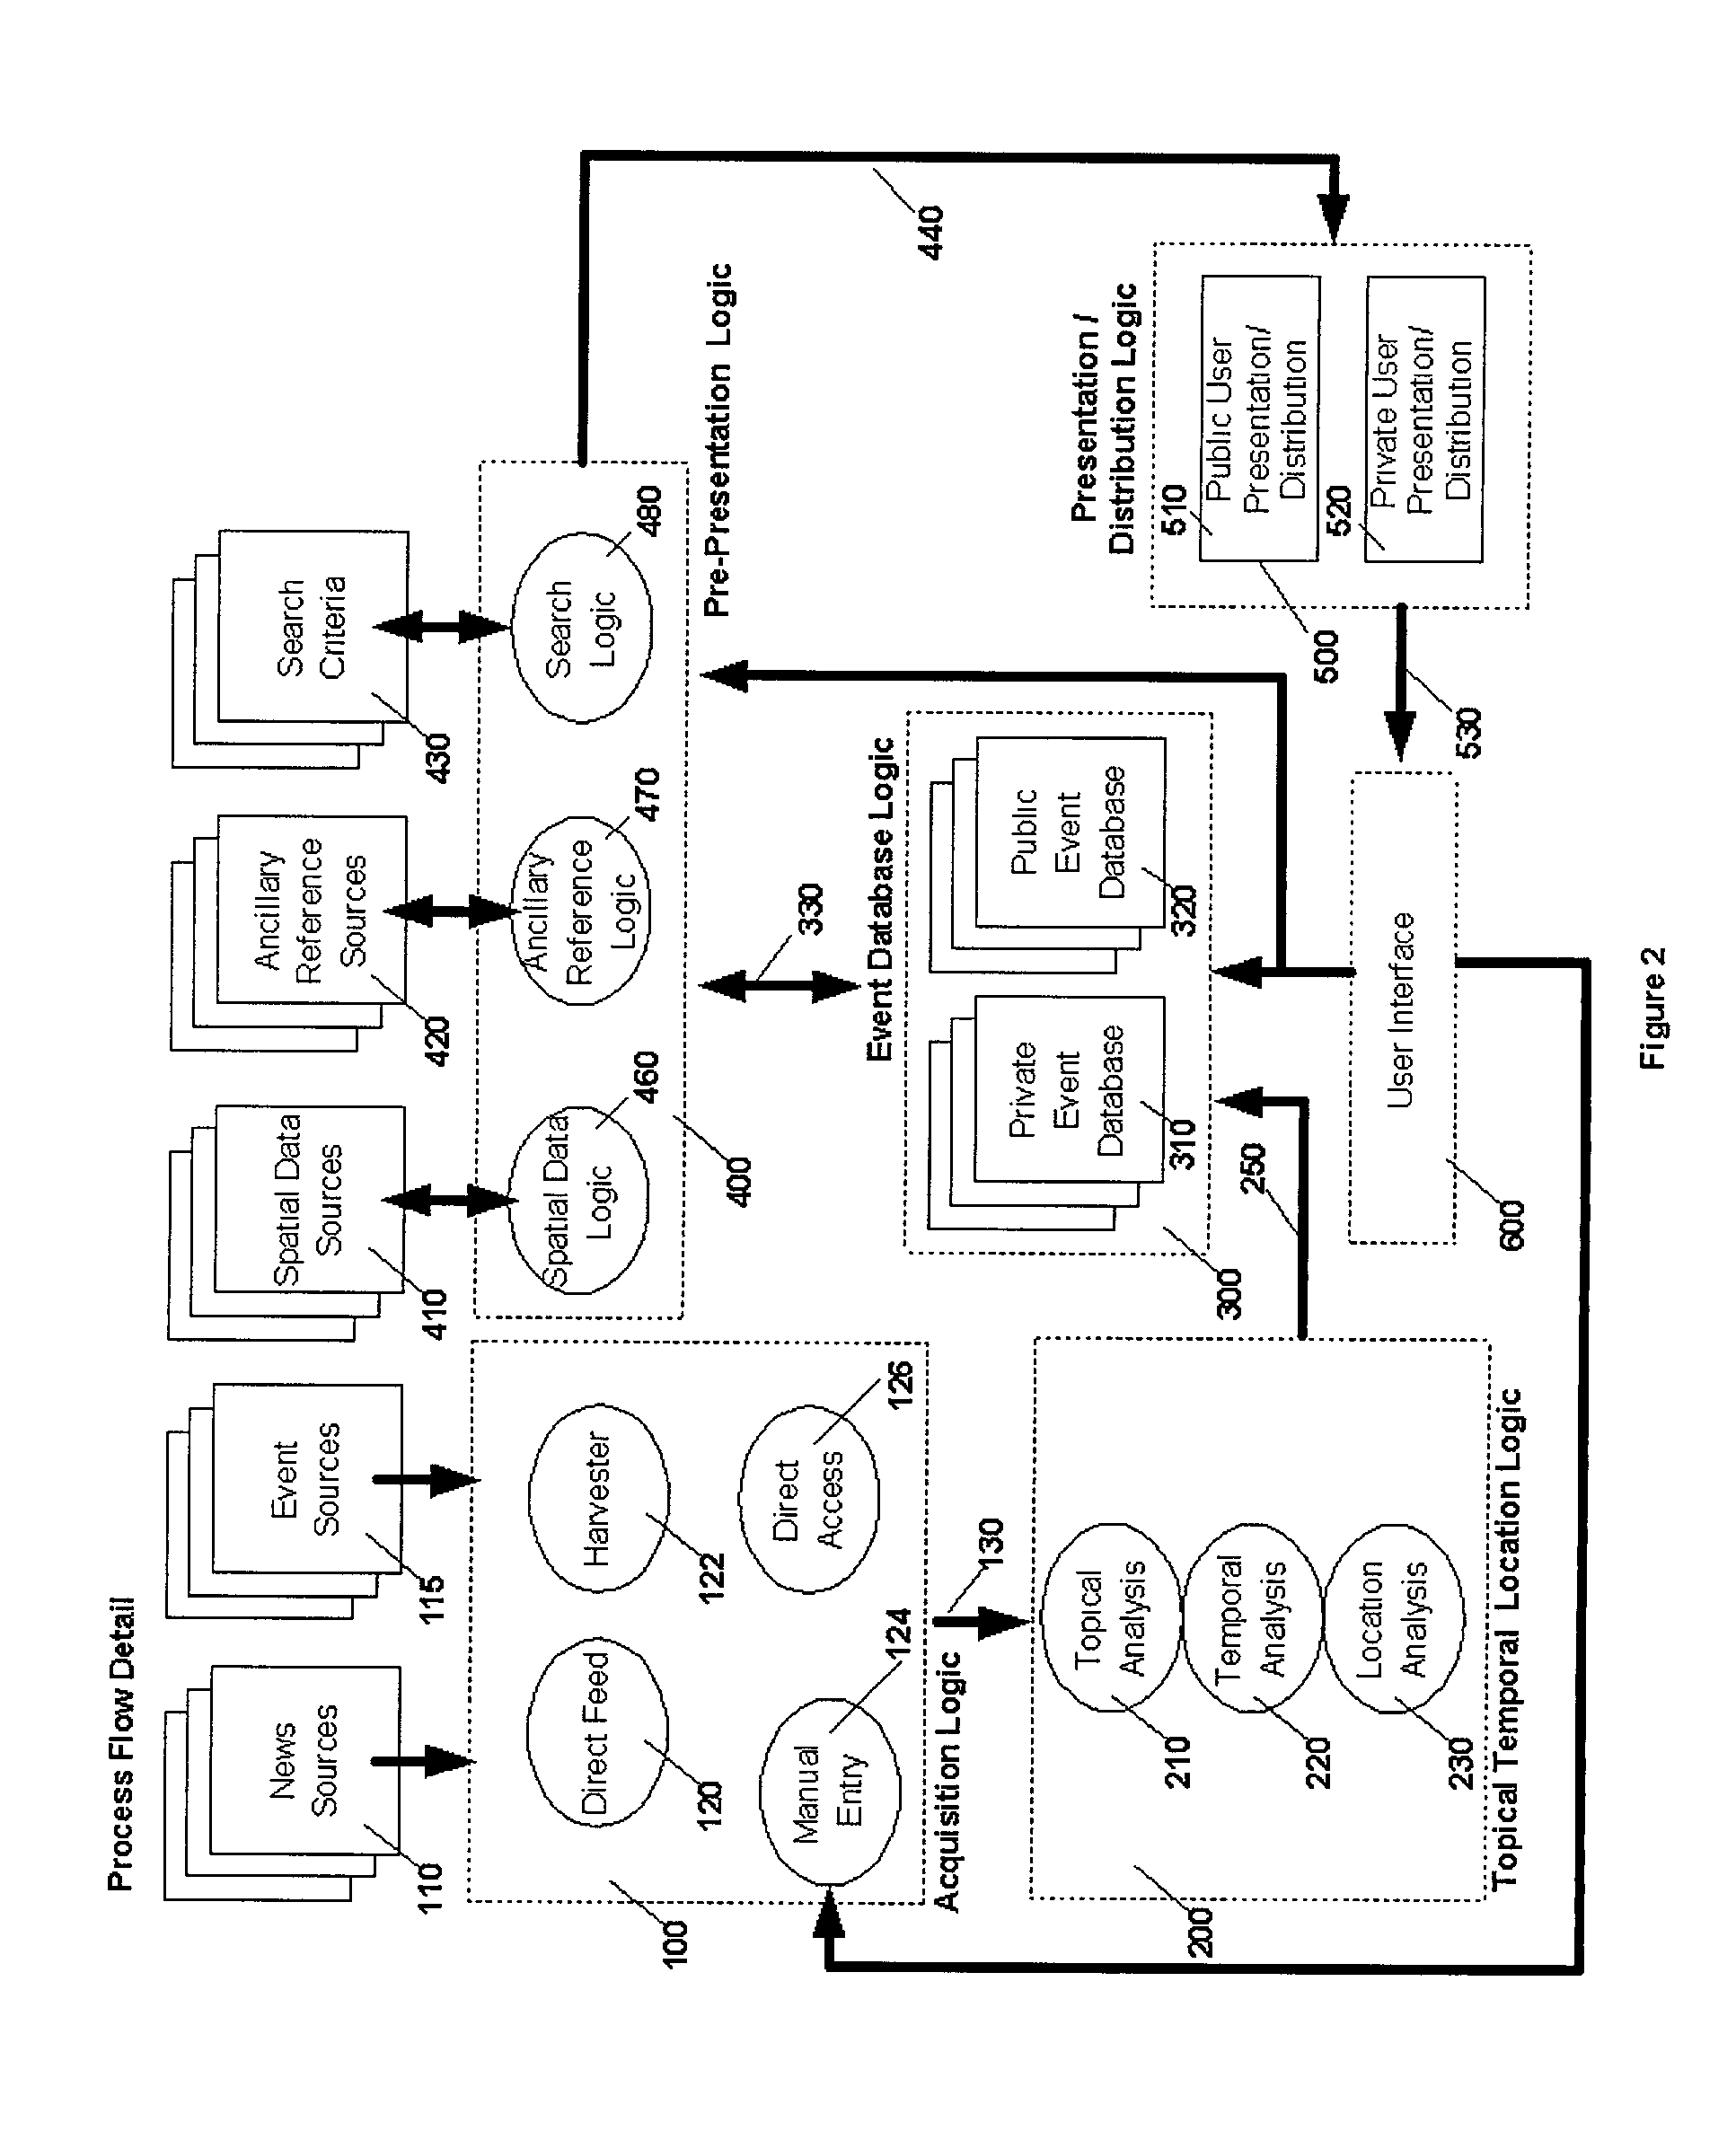 Method of organizing information into topical, temporal, and location associations for organizing, selecting, and distributing information